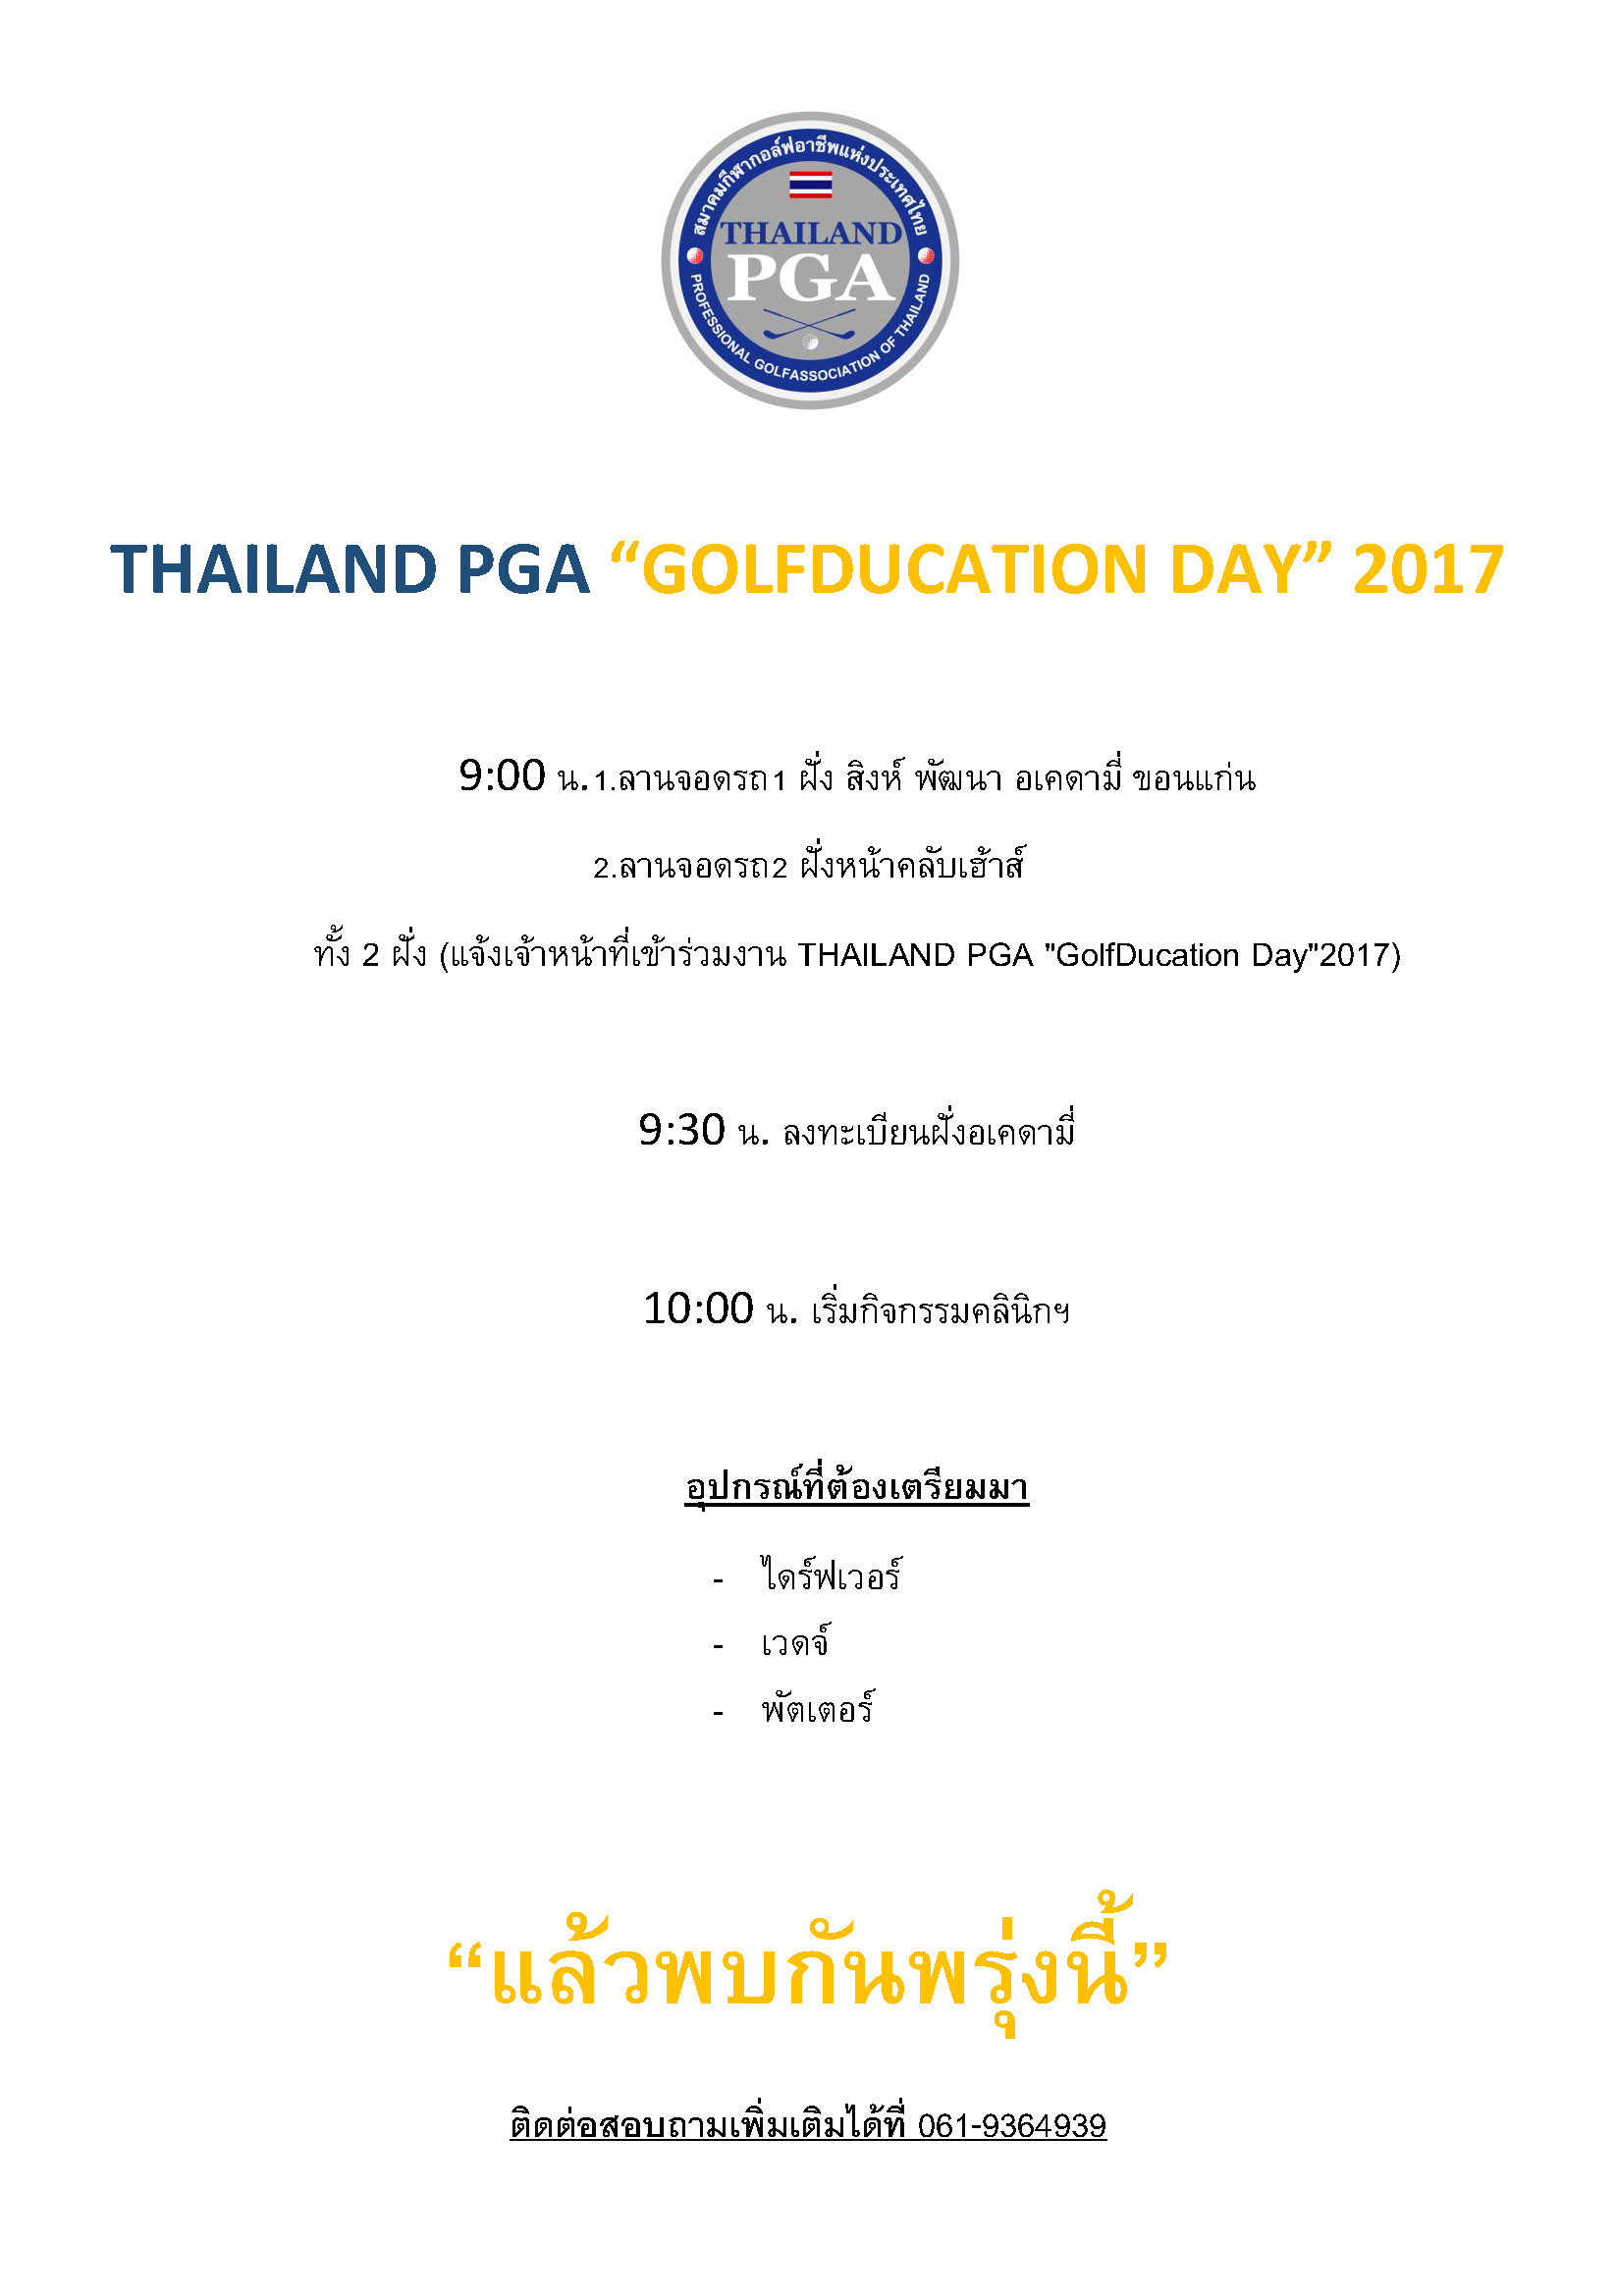 golfducation-day-2017-2559